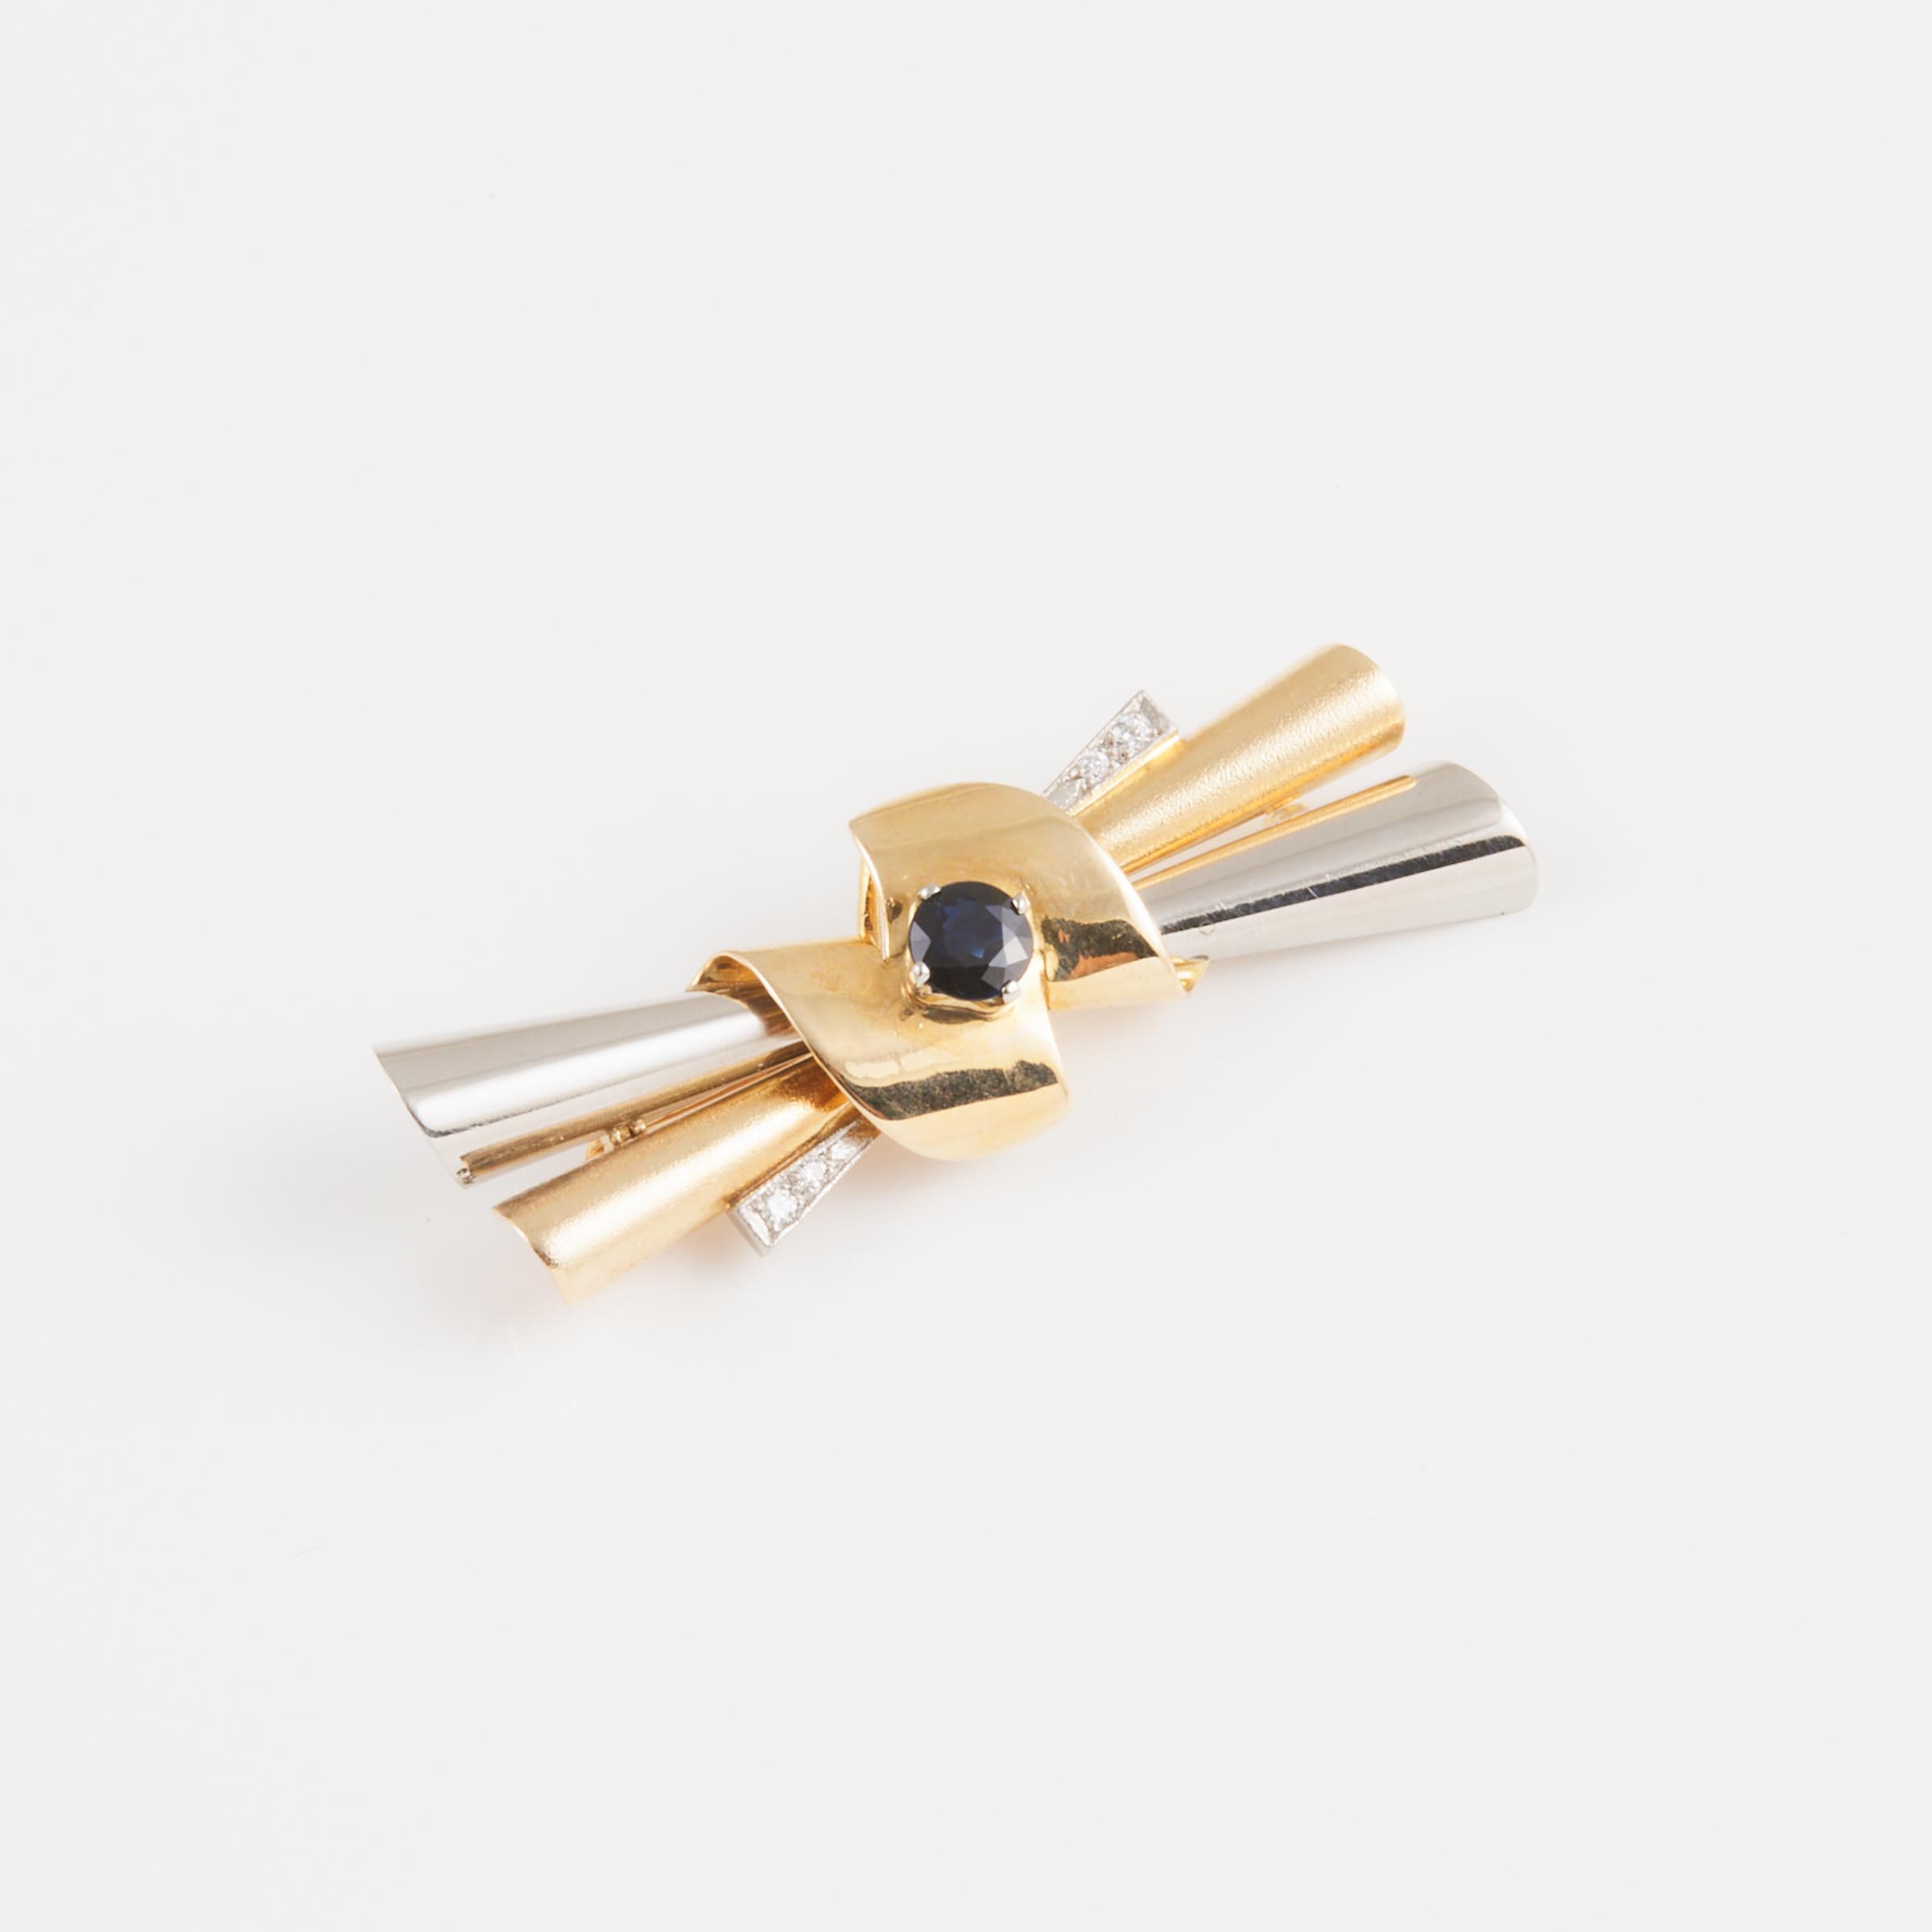 Retro 14k/18k Yellow And White Gold Bar Brooch